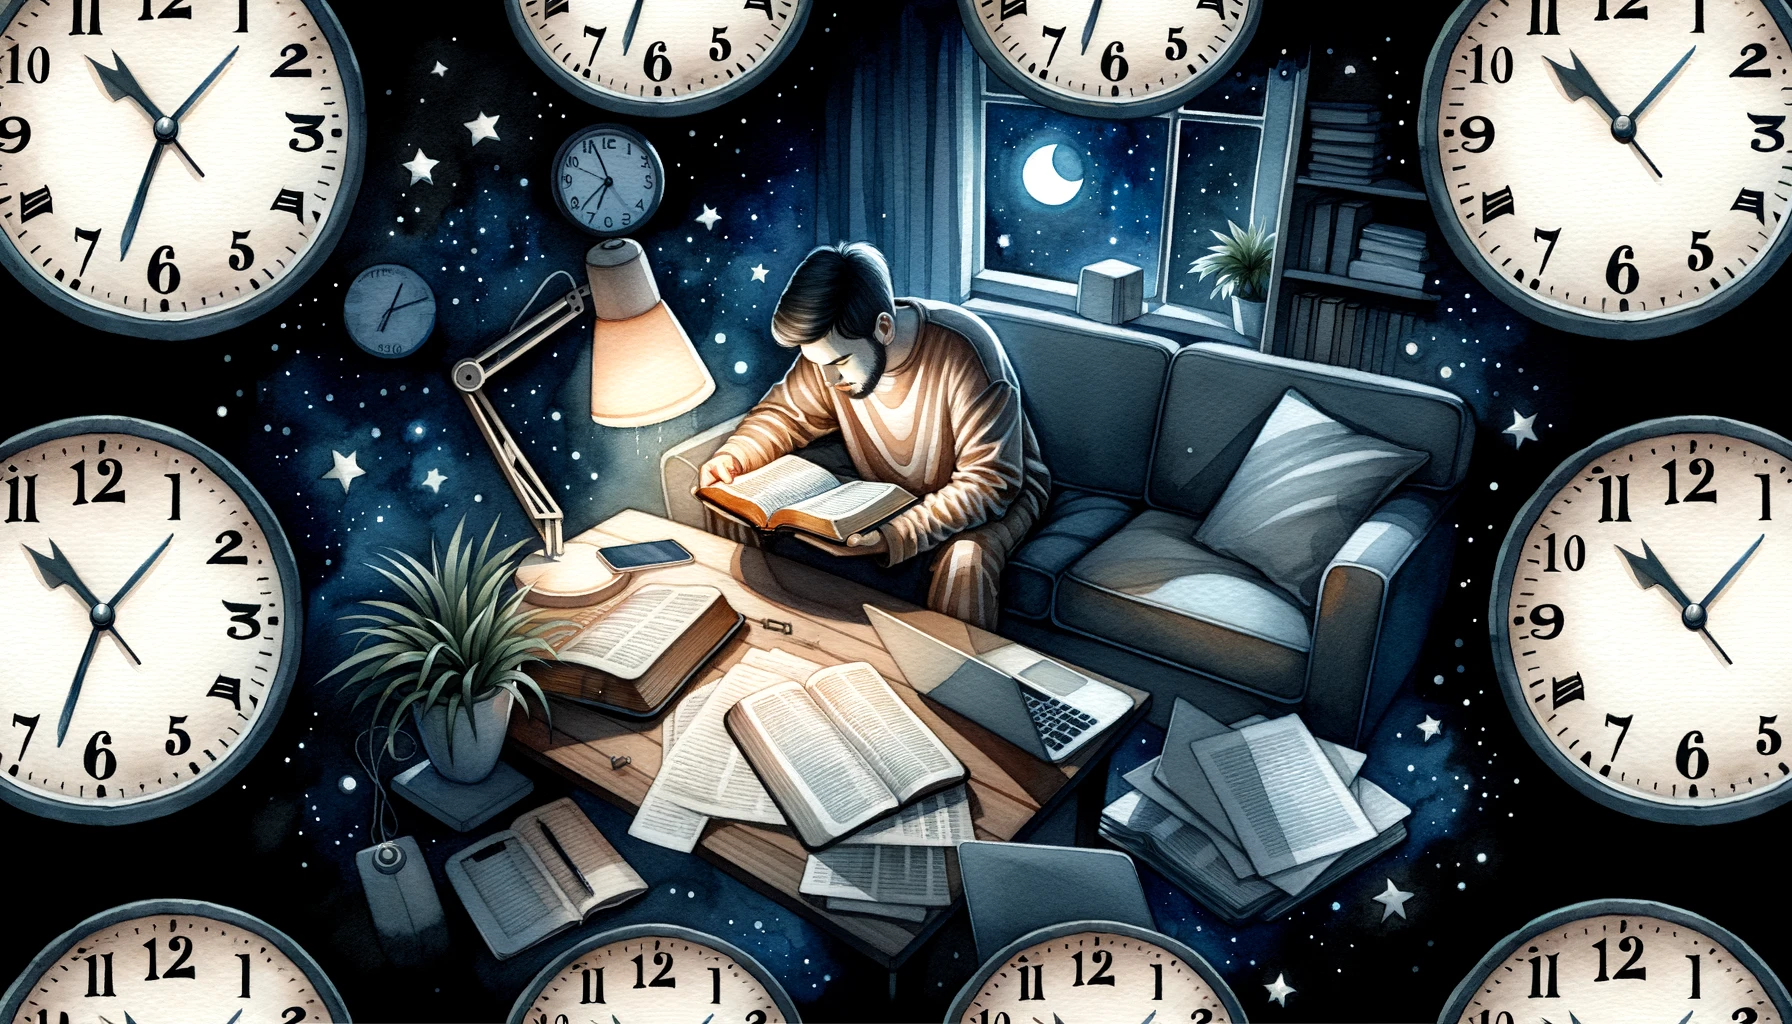 Indoor night scene, an individual illuminated by a lamp, engrossed in Bible study. Nearby, a laptop, papers, and a clock subtly convey the harmony of daily tasks and spiritual pursuits.